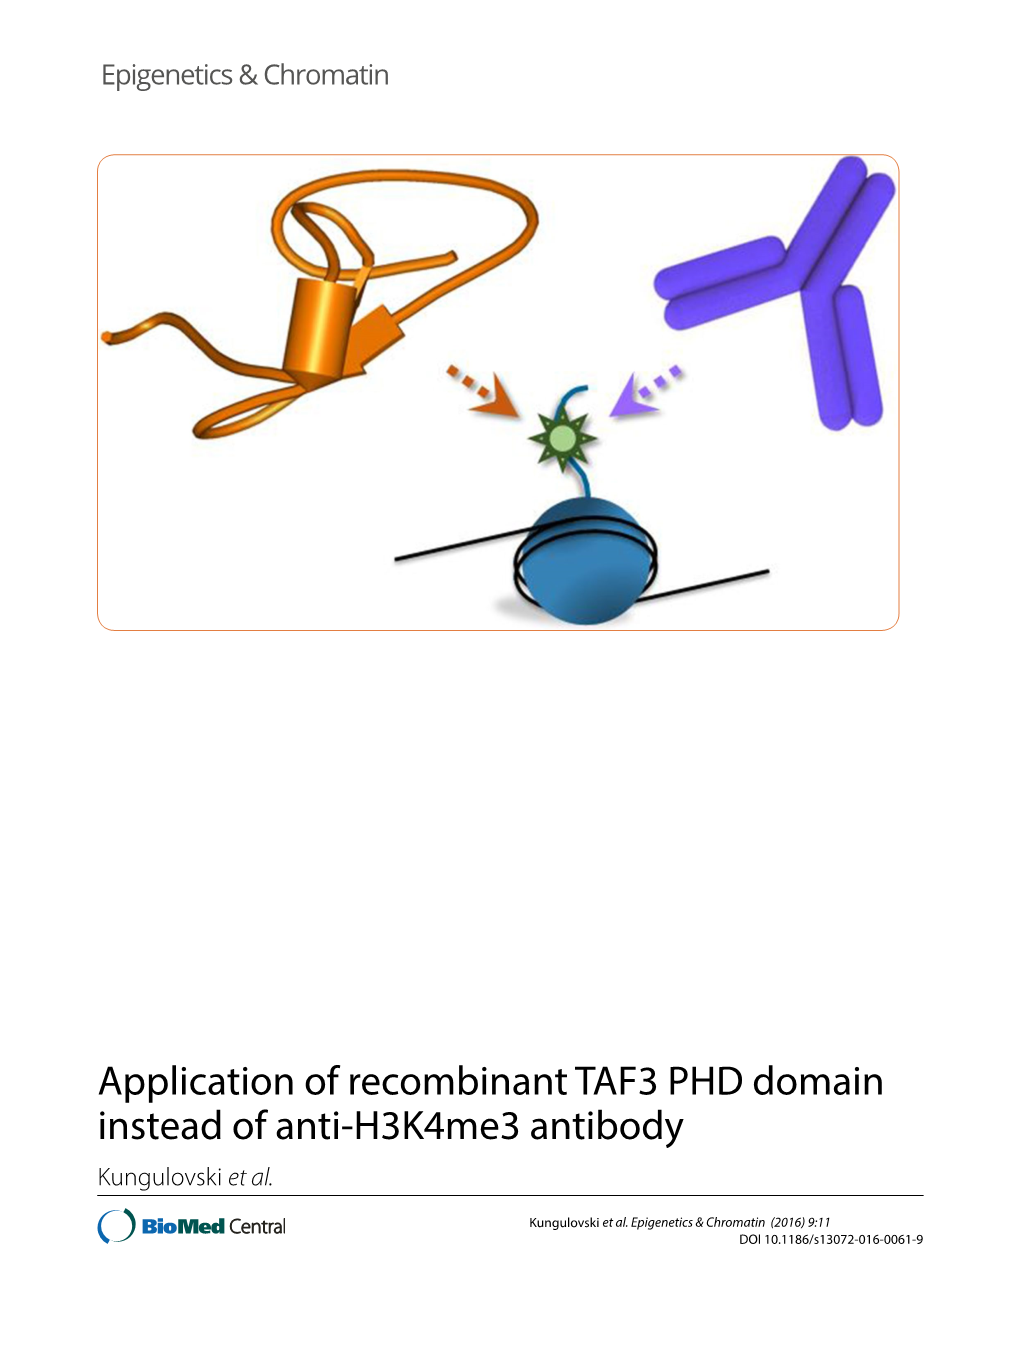 Application of Recombinant TAF3 PHD Domain Instead of Anti-H3k4me3